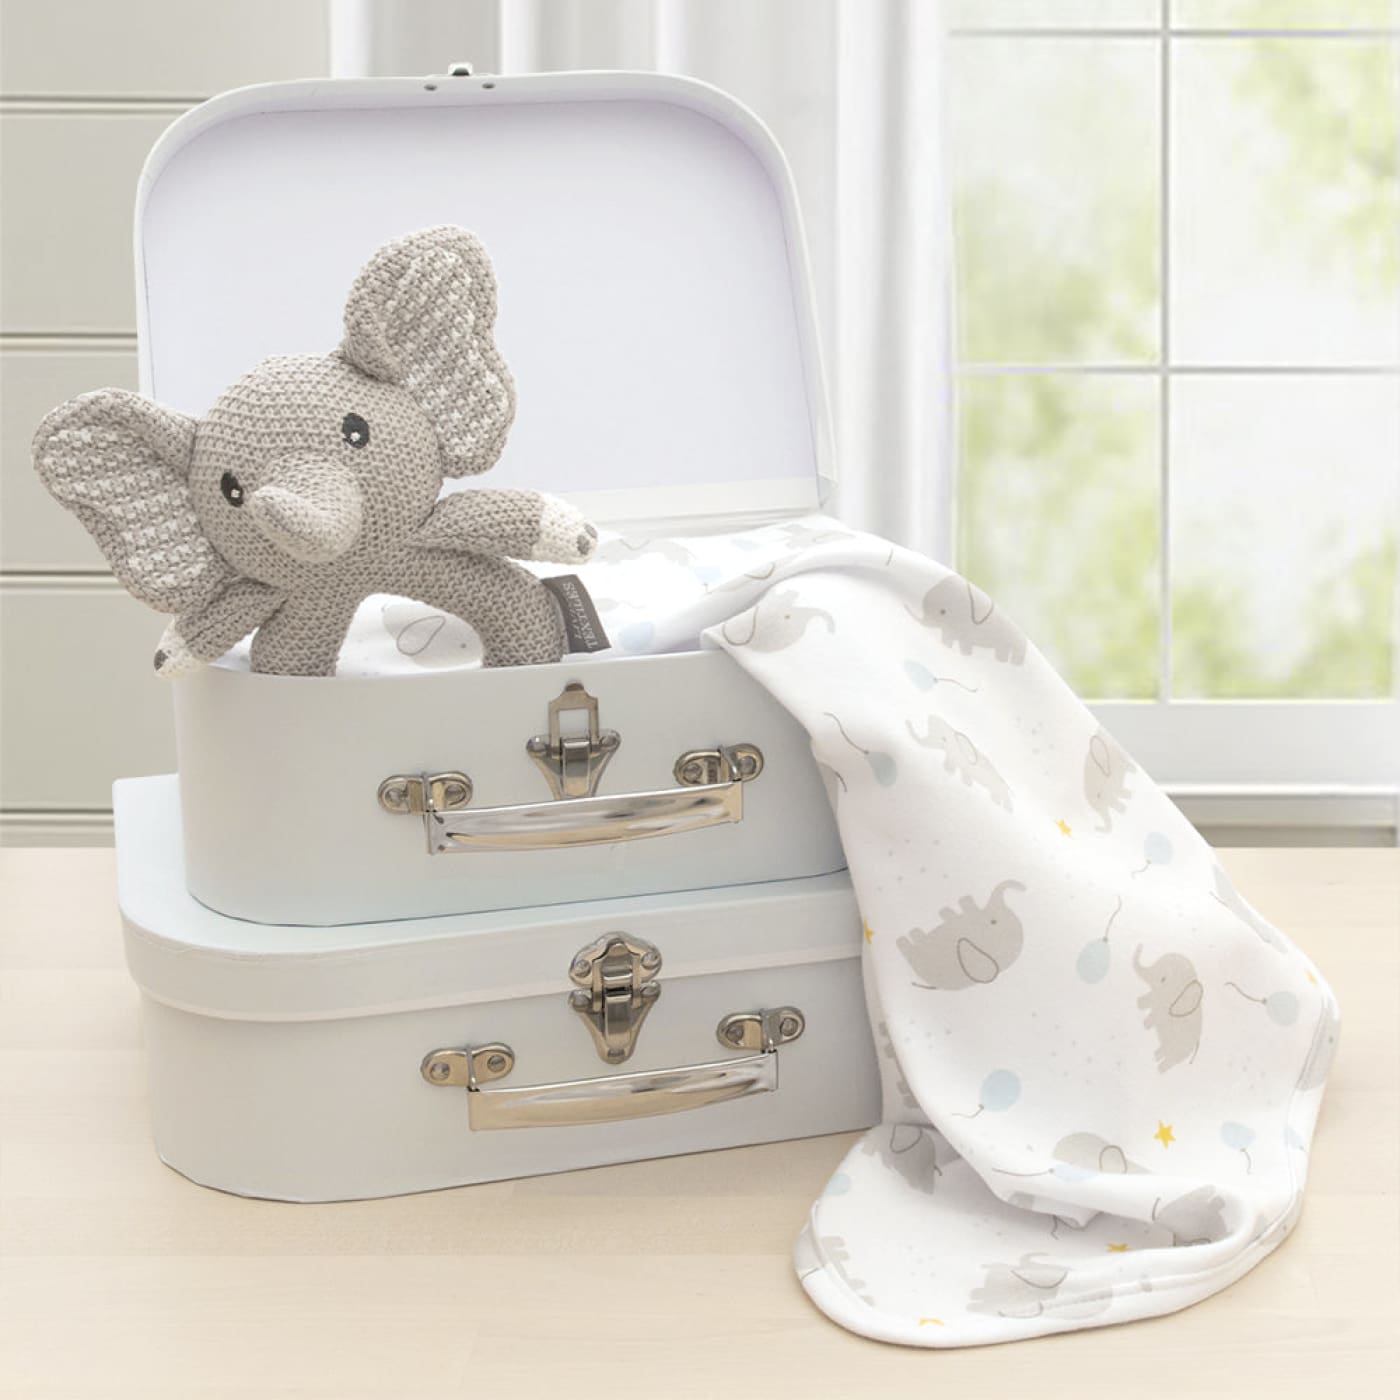 Living Textiles Jersey Swaddle & Ring Rattle Gift Set - Mason Elephant - Mason Elephant - GIFTS - SWADDLES/WRAPS SETS